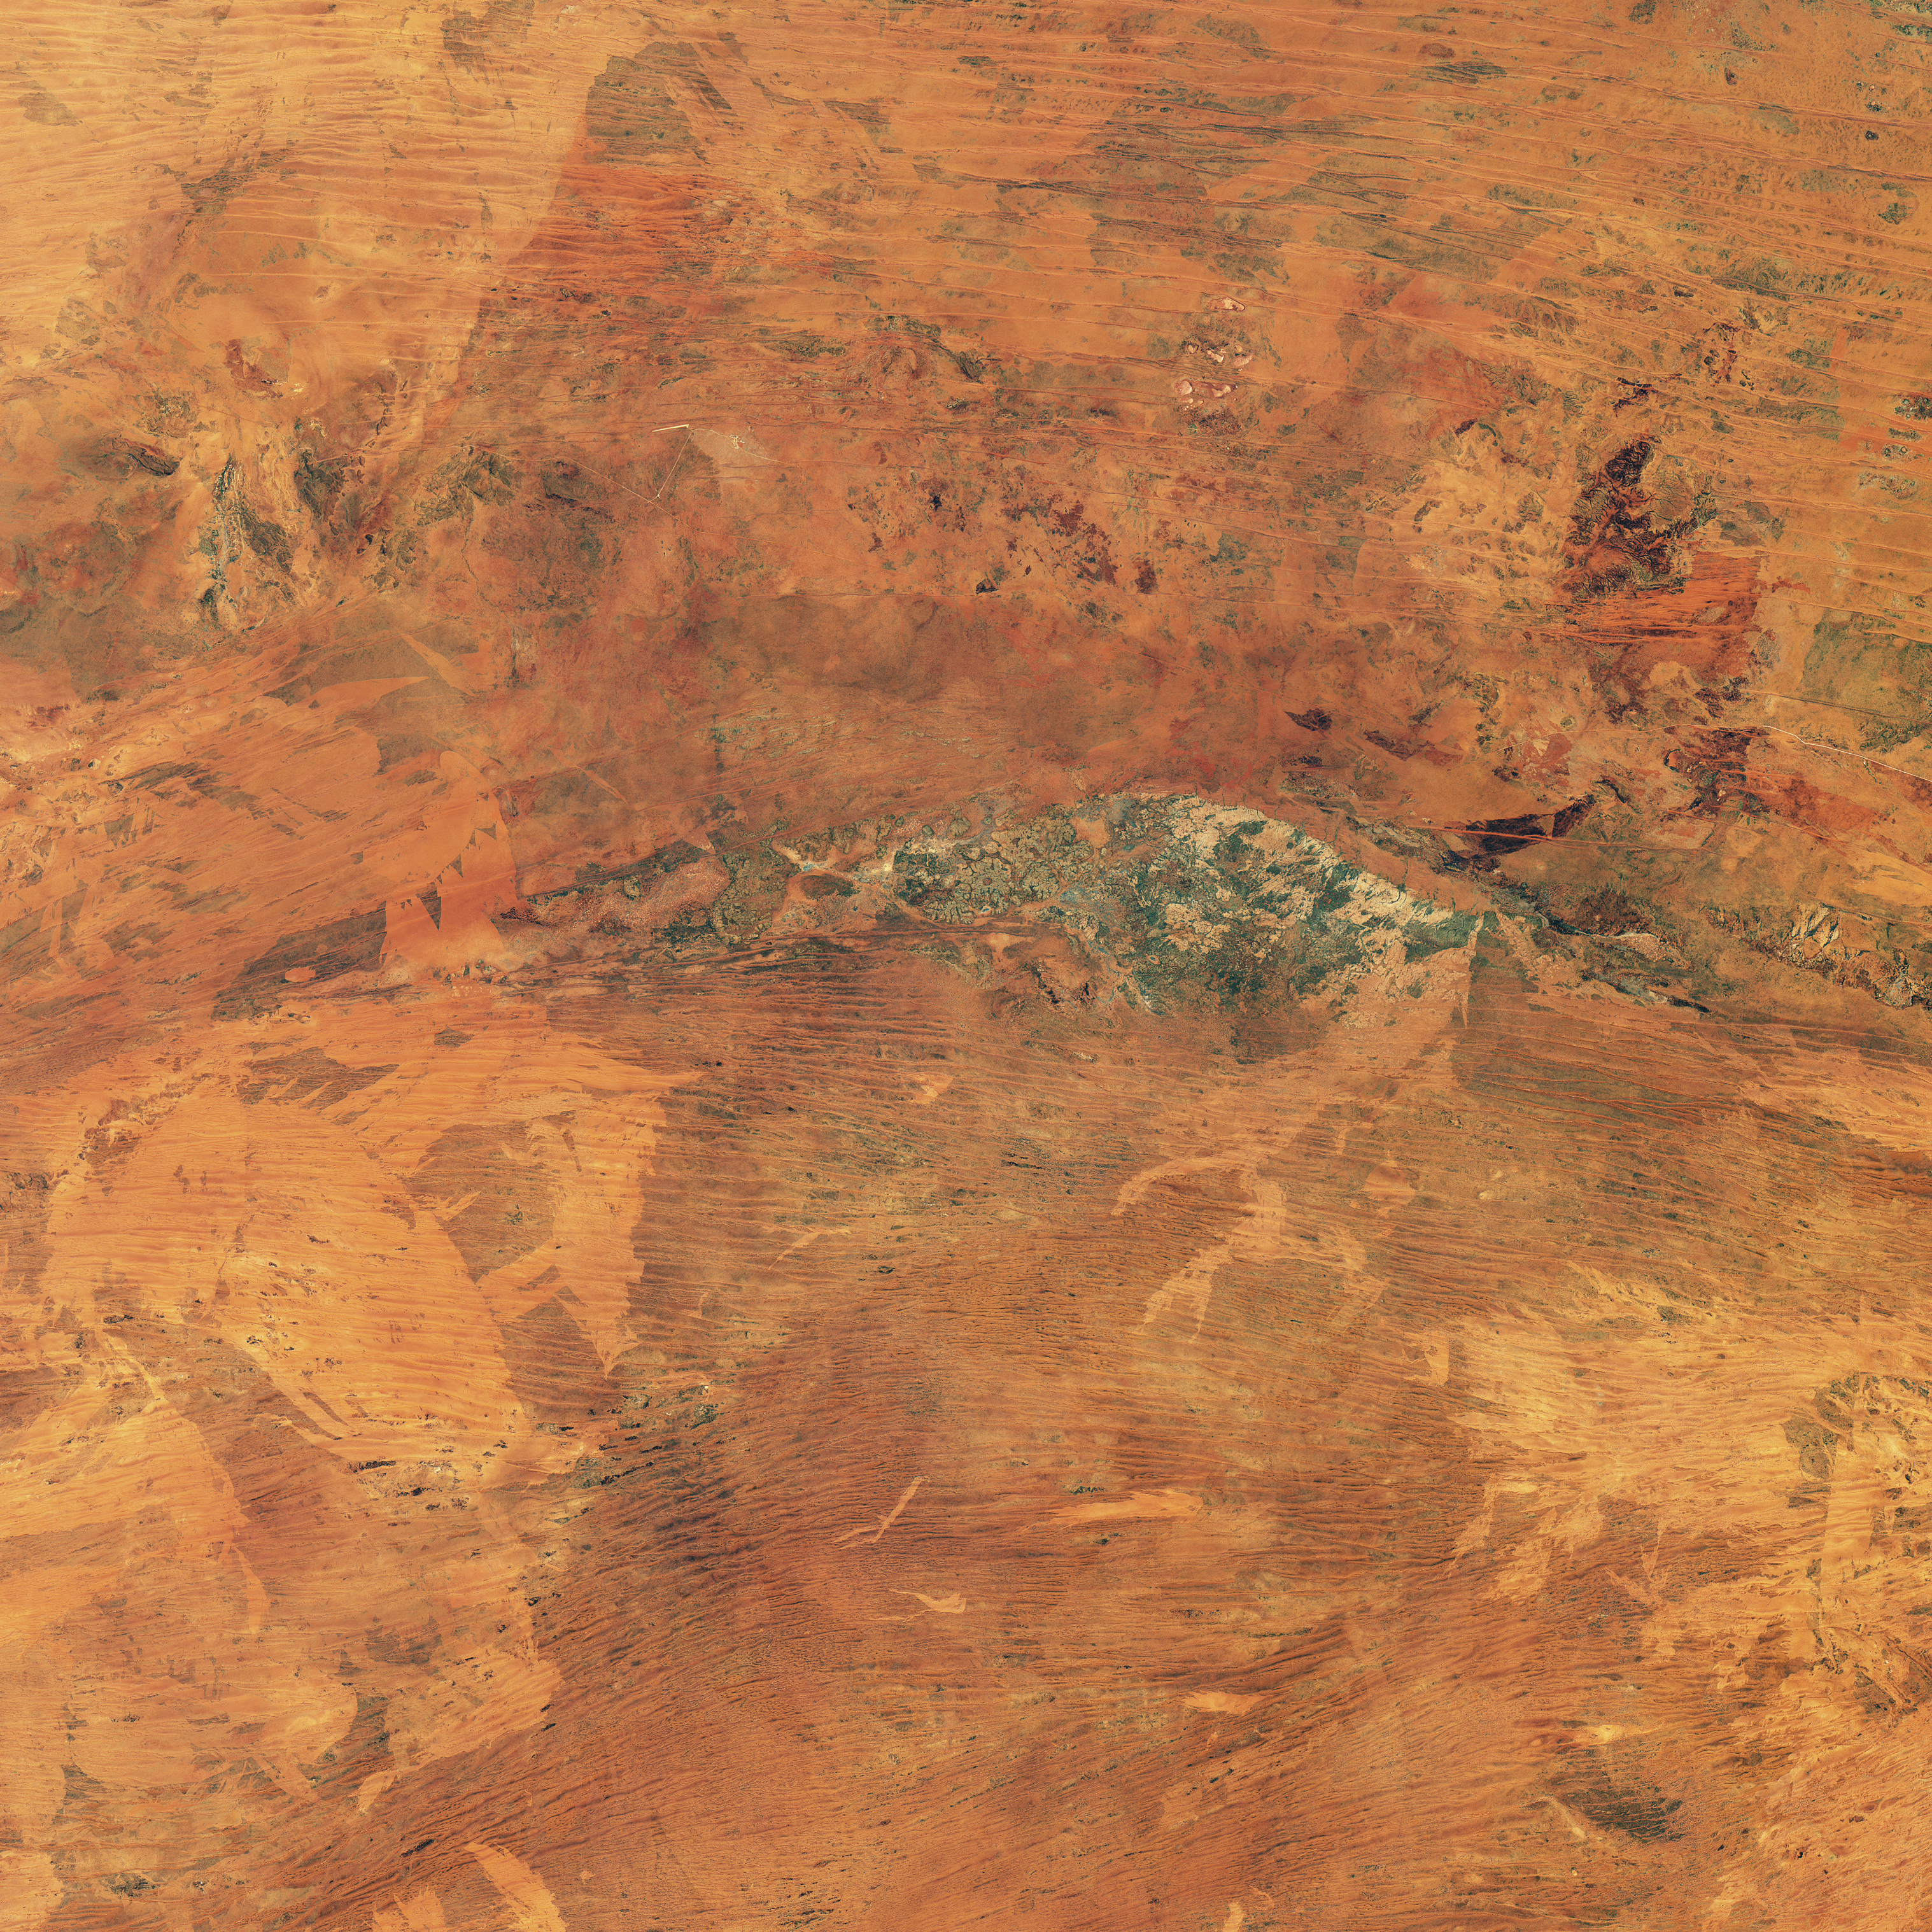 A Desert Landscape Scarred by Fire - related image preview